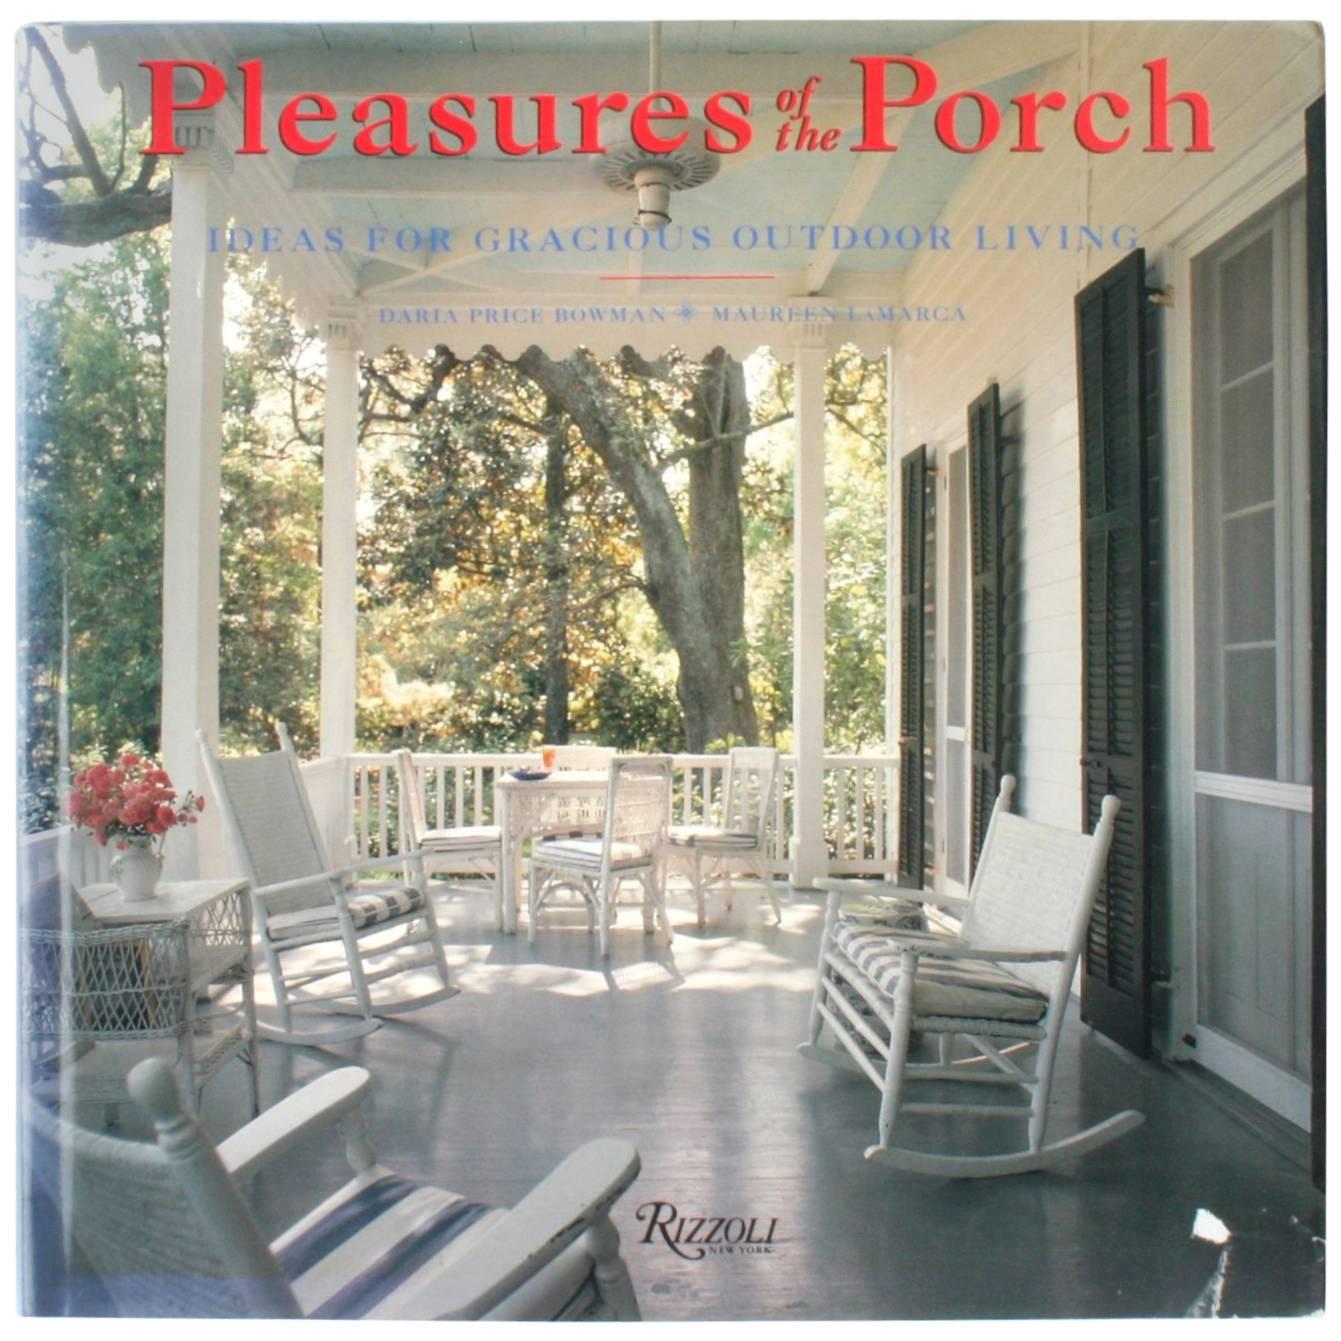 Pleasures of the Porch, Ideas for Gracious Outdoor Living